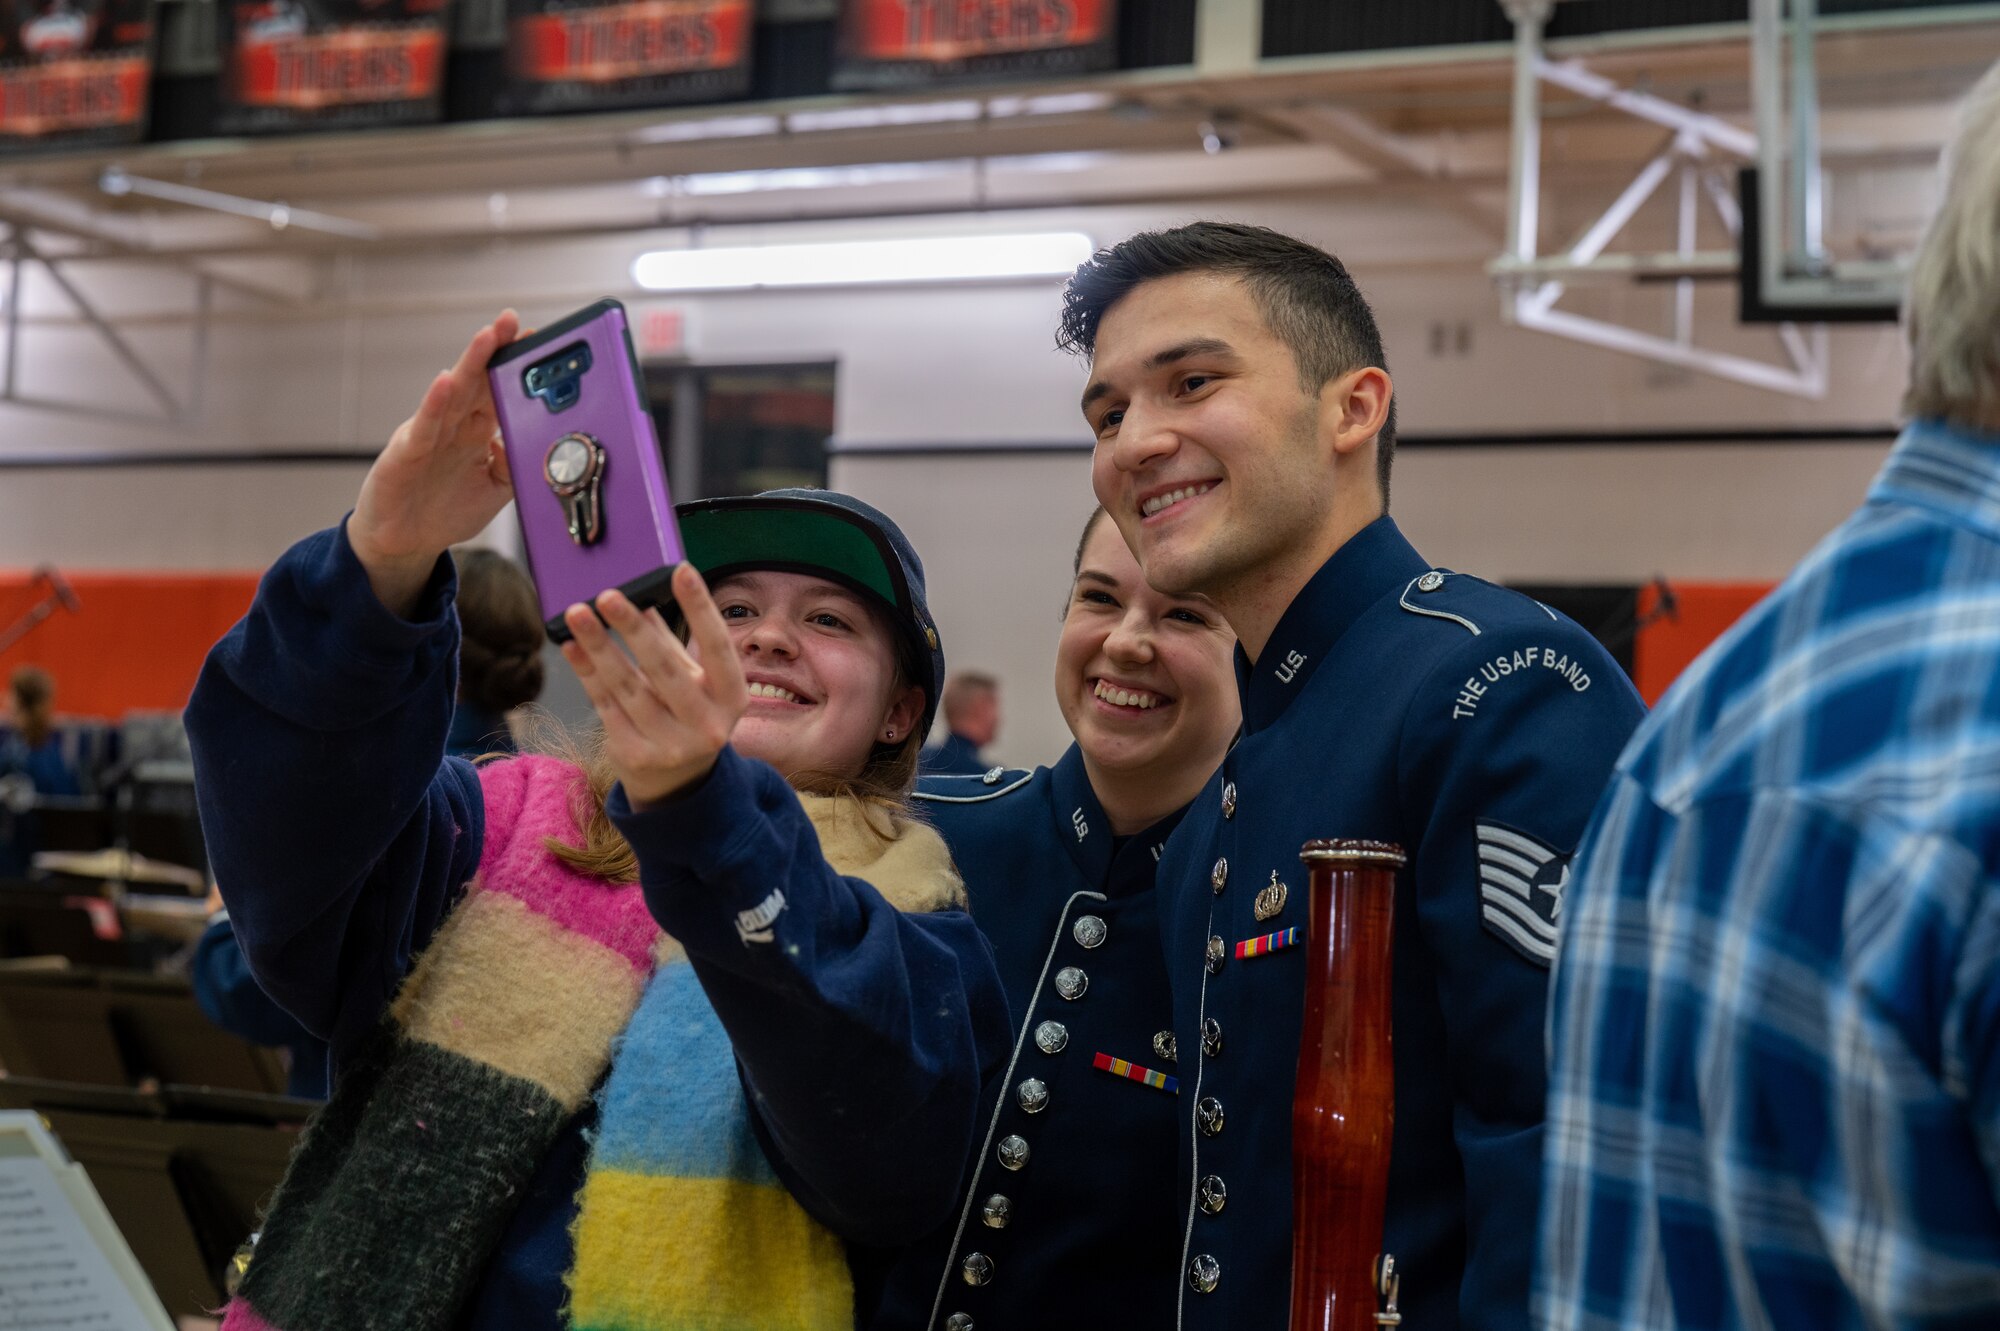 U.S. Air Force Tech. Sgts. Emily Foster and Isaac Sanabria pose for a selfie with an audience member after The United States Air Force Band’s Fall Tour concert at Battle Ground High School, Battle Ground, Wash., Oct. 24, 2022. The Band’s live performances attracted thousands of audience members from across the Pacific Northwest region. (U.S. Air Force photo by Kristen Wong)